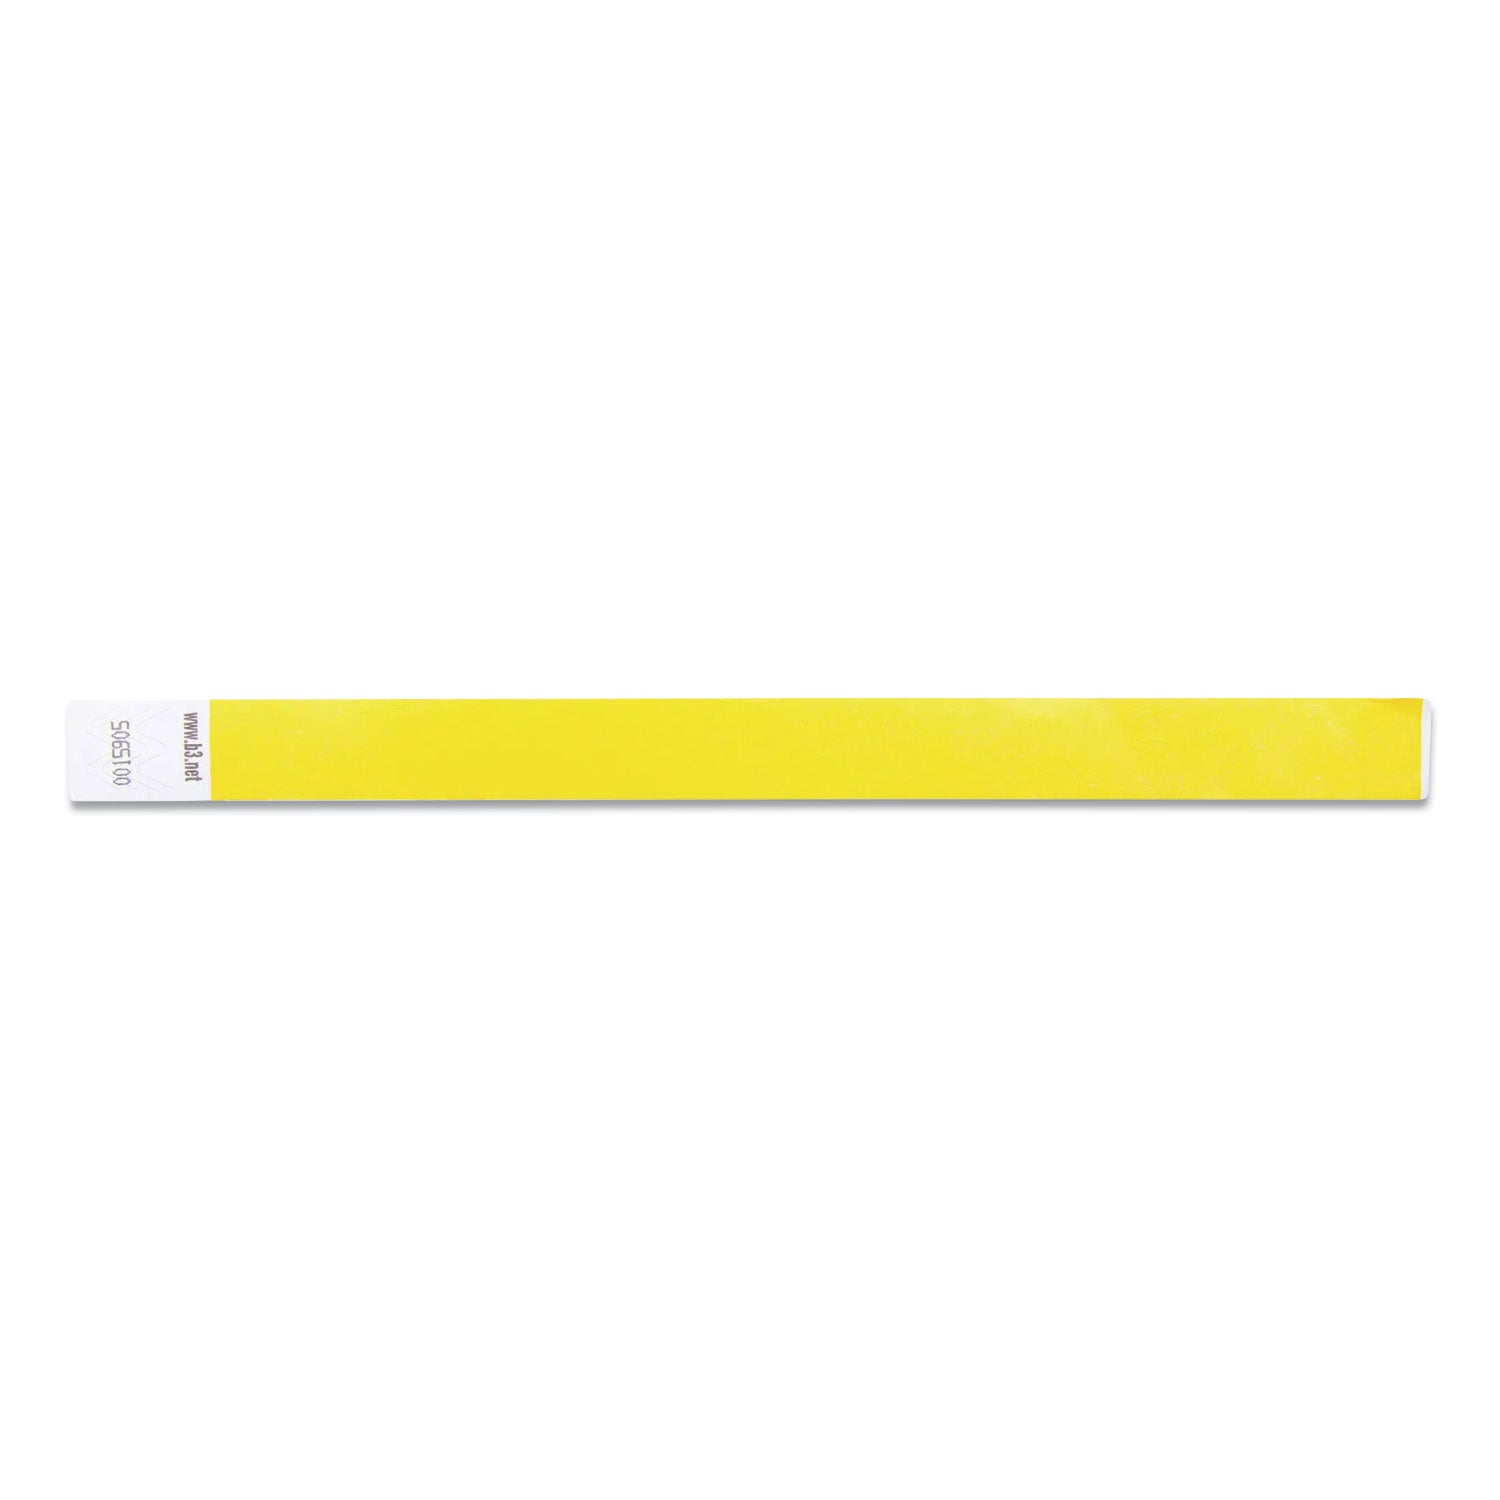 Security Wristbands, Sequentially Numbered, 10" x 0.75", Yellow, 100/Pack - 